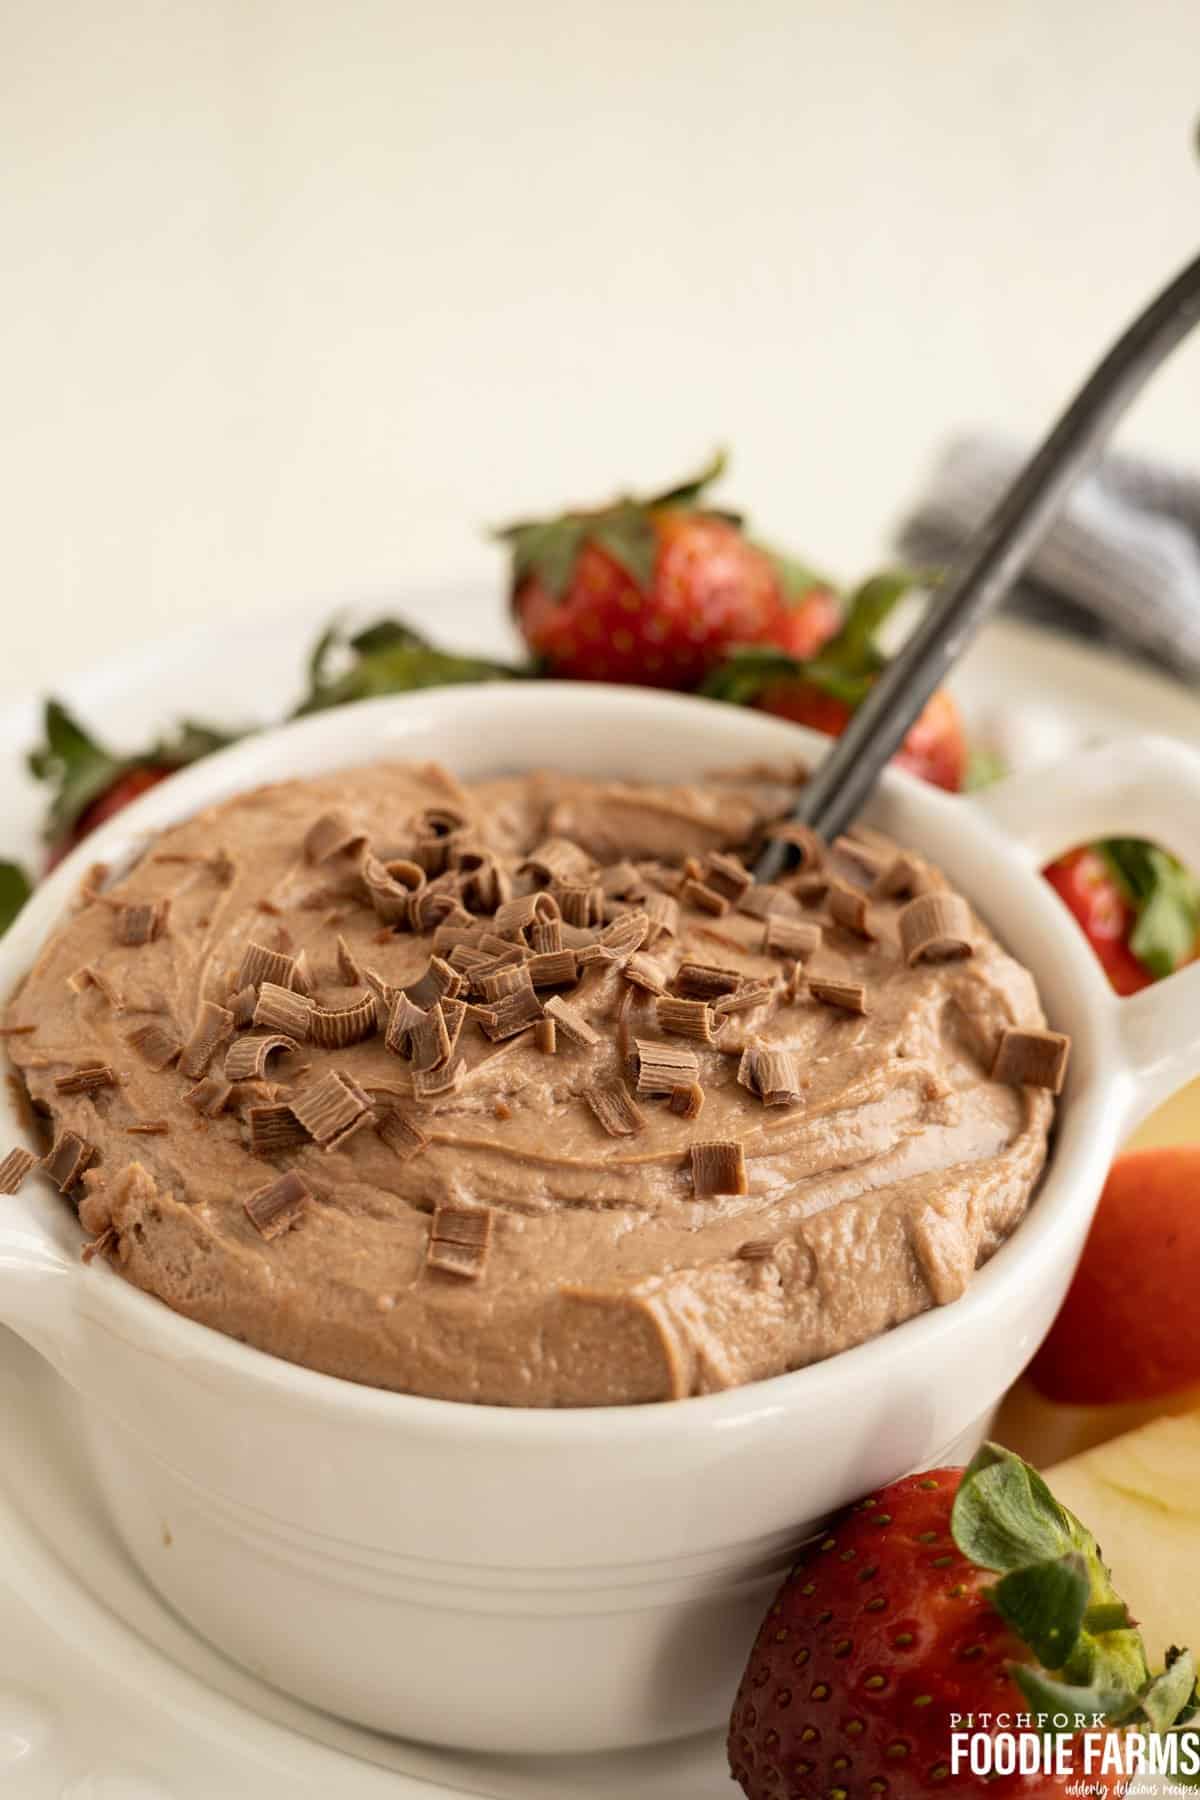 A bowl of fluffy chocolate dip with strawberries and fresh fruit.